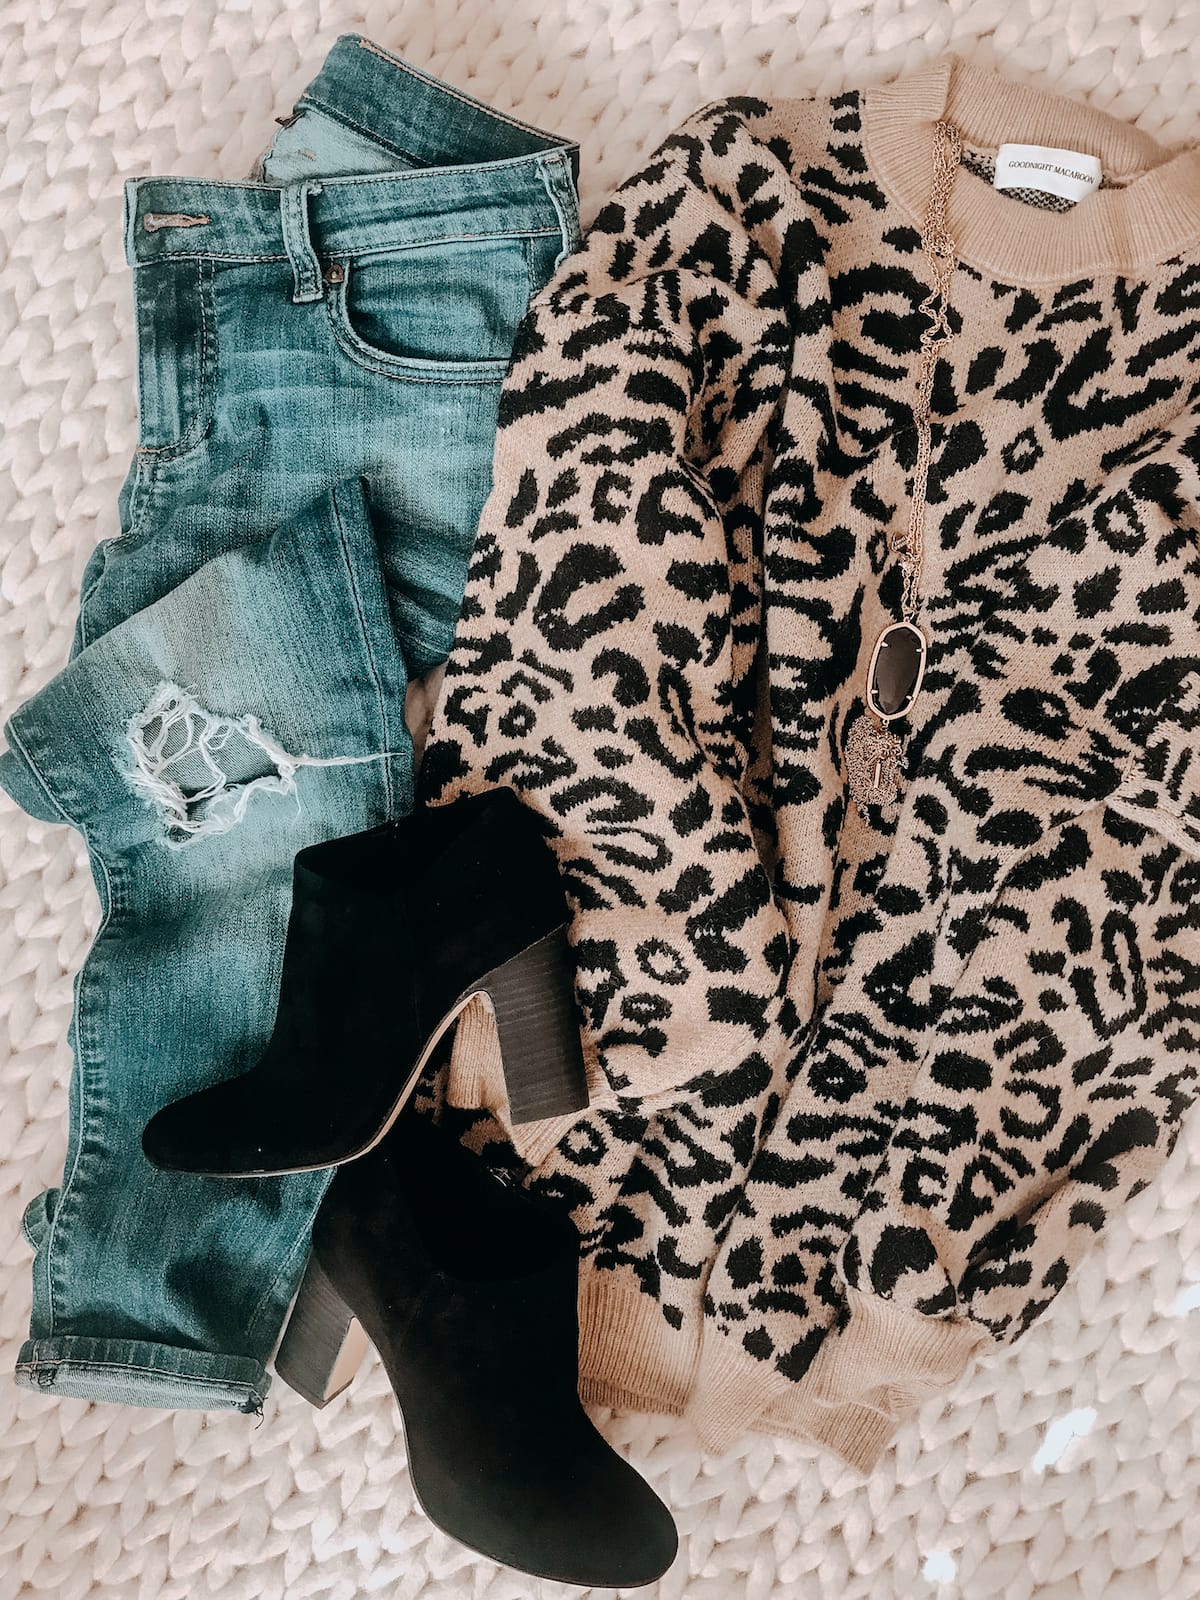 Winter outfit - leopard sweater jeans and black booties